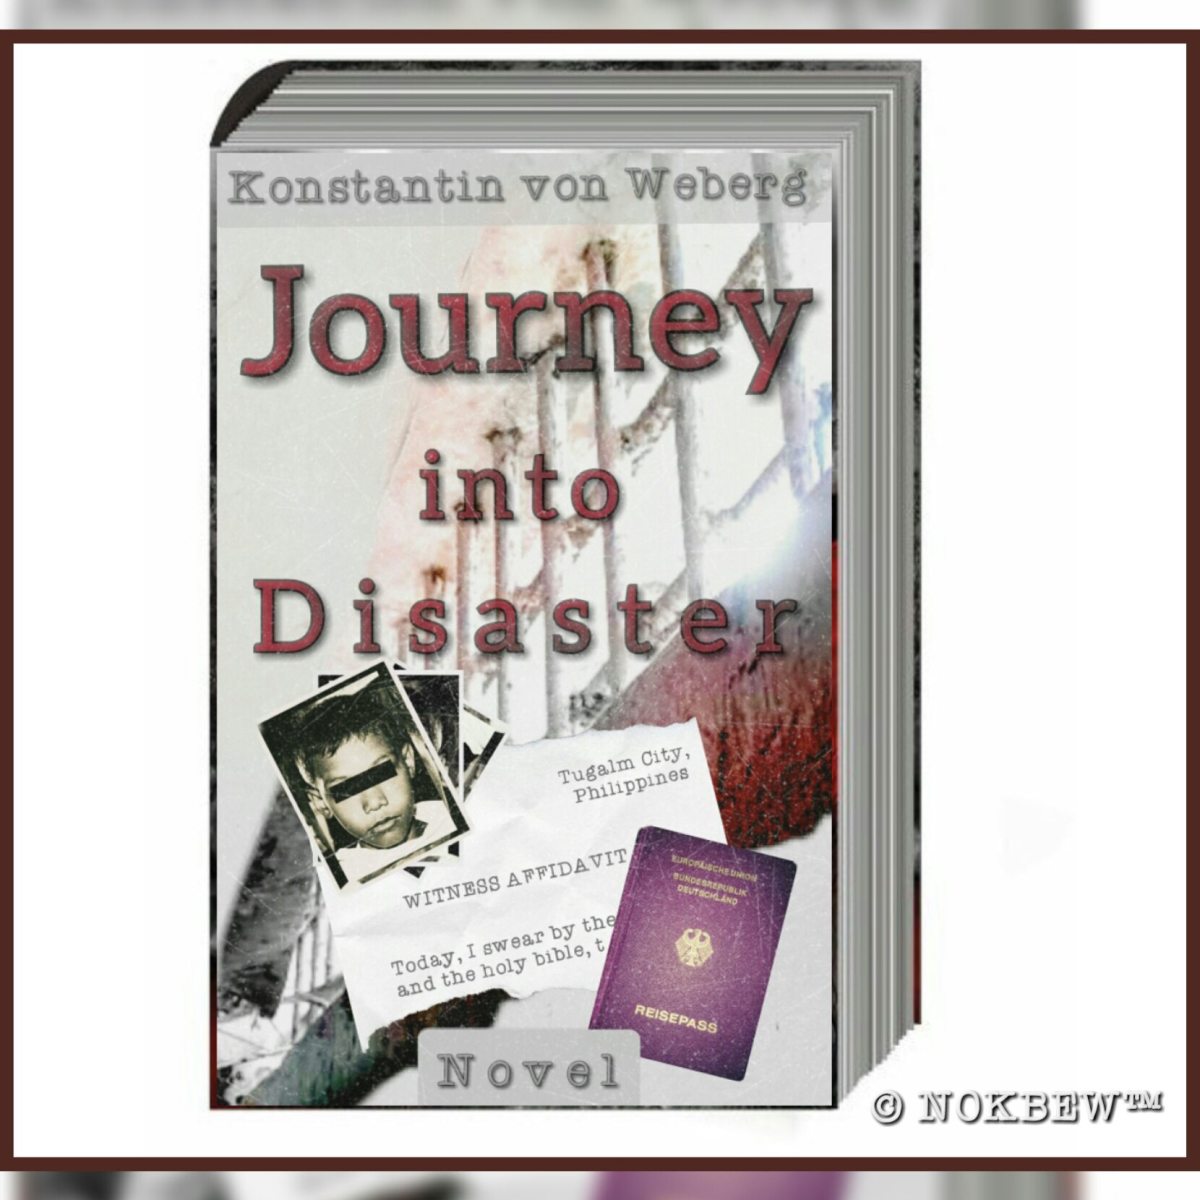 Novel »Journey into Disaster« for free until Feb. 5th. on Amazon’s Kindle!